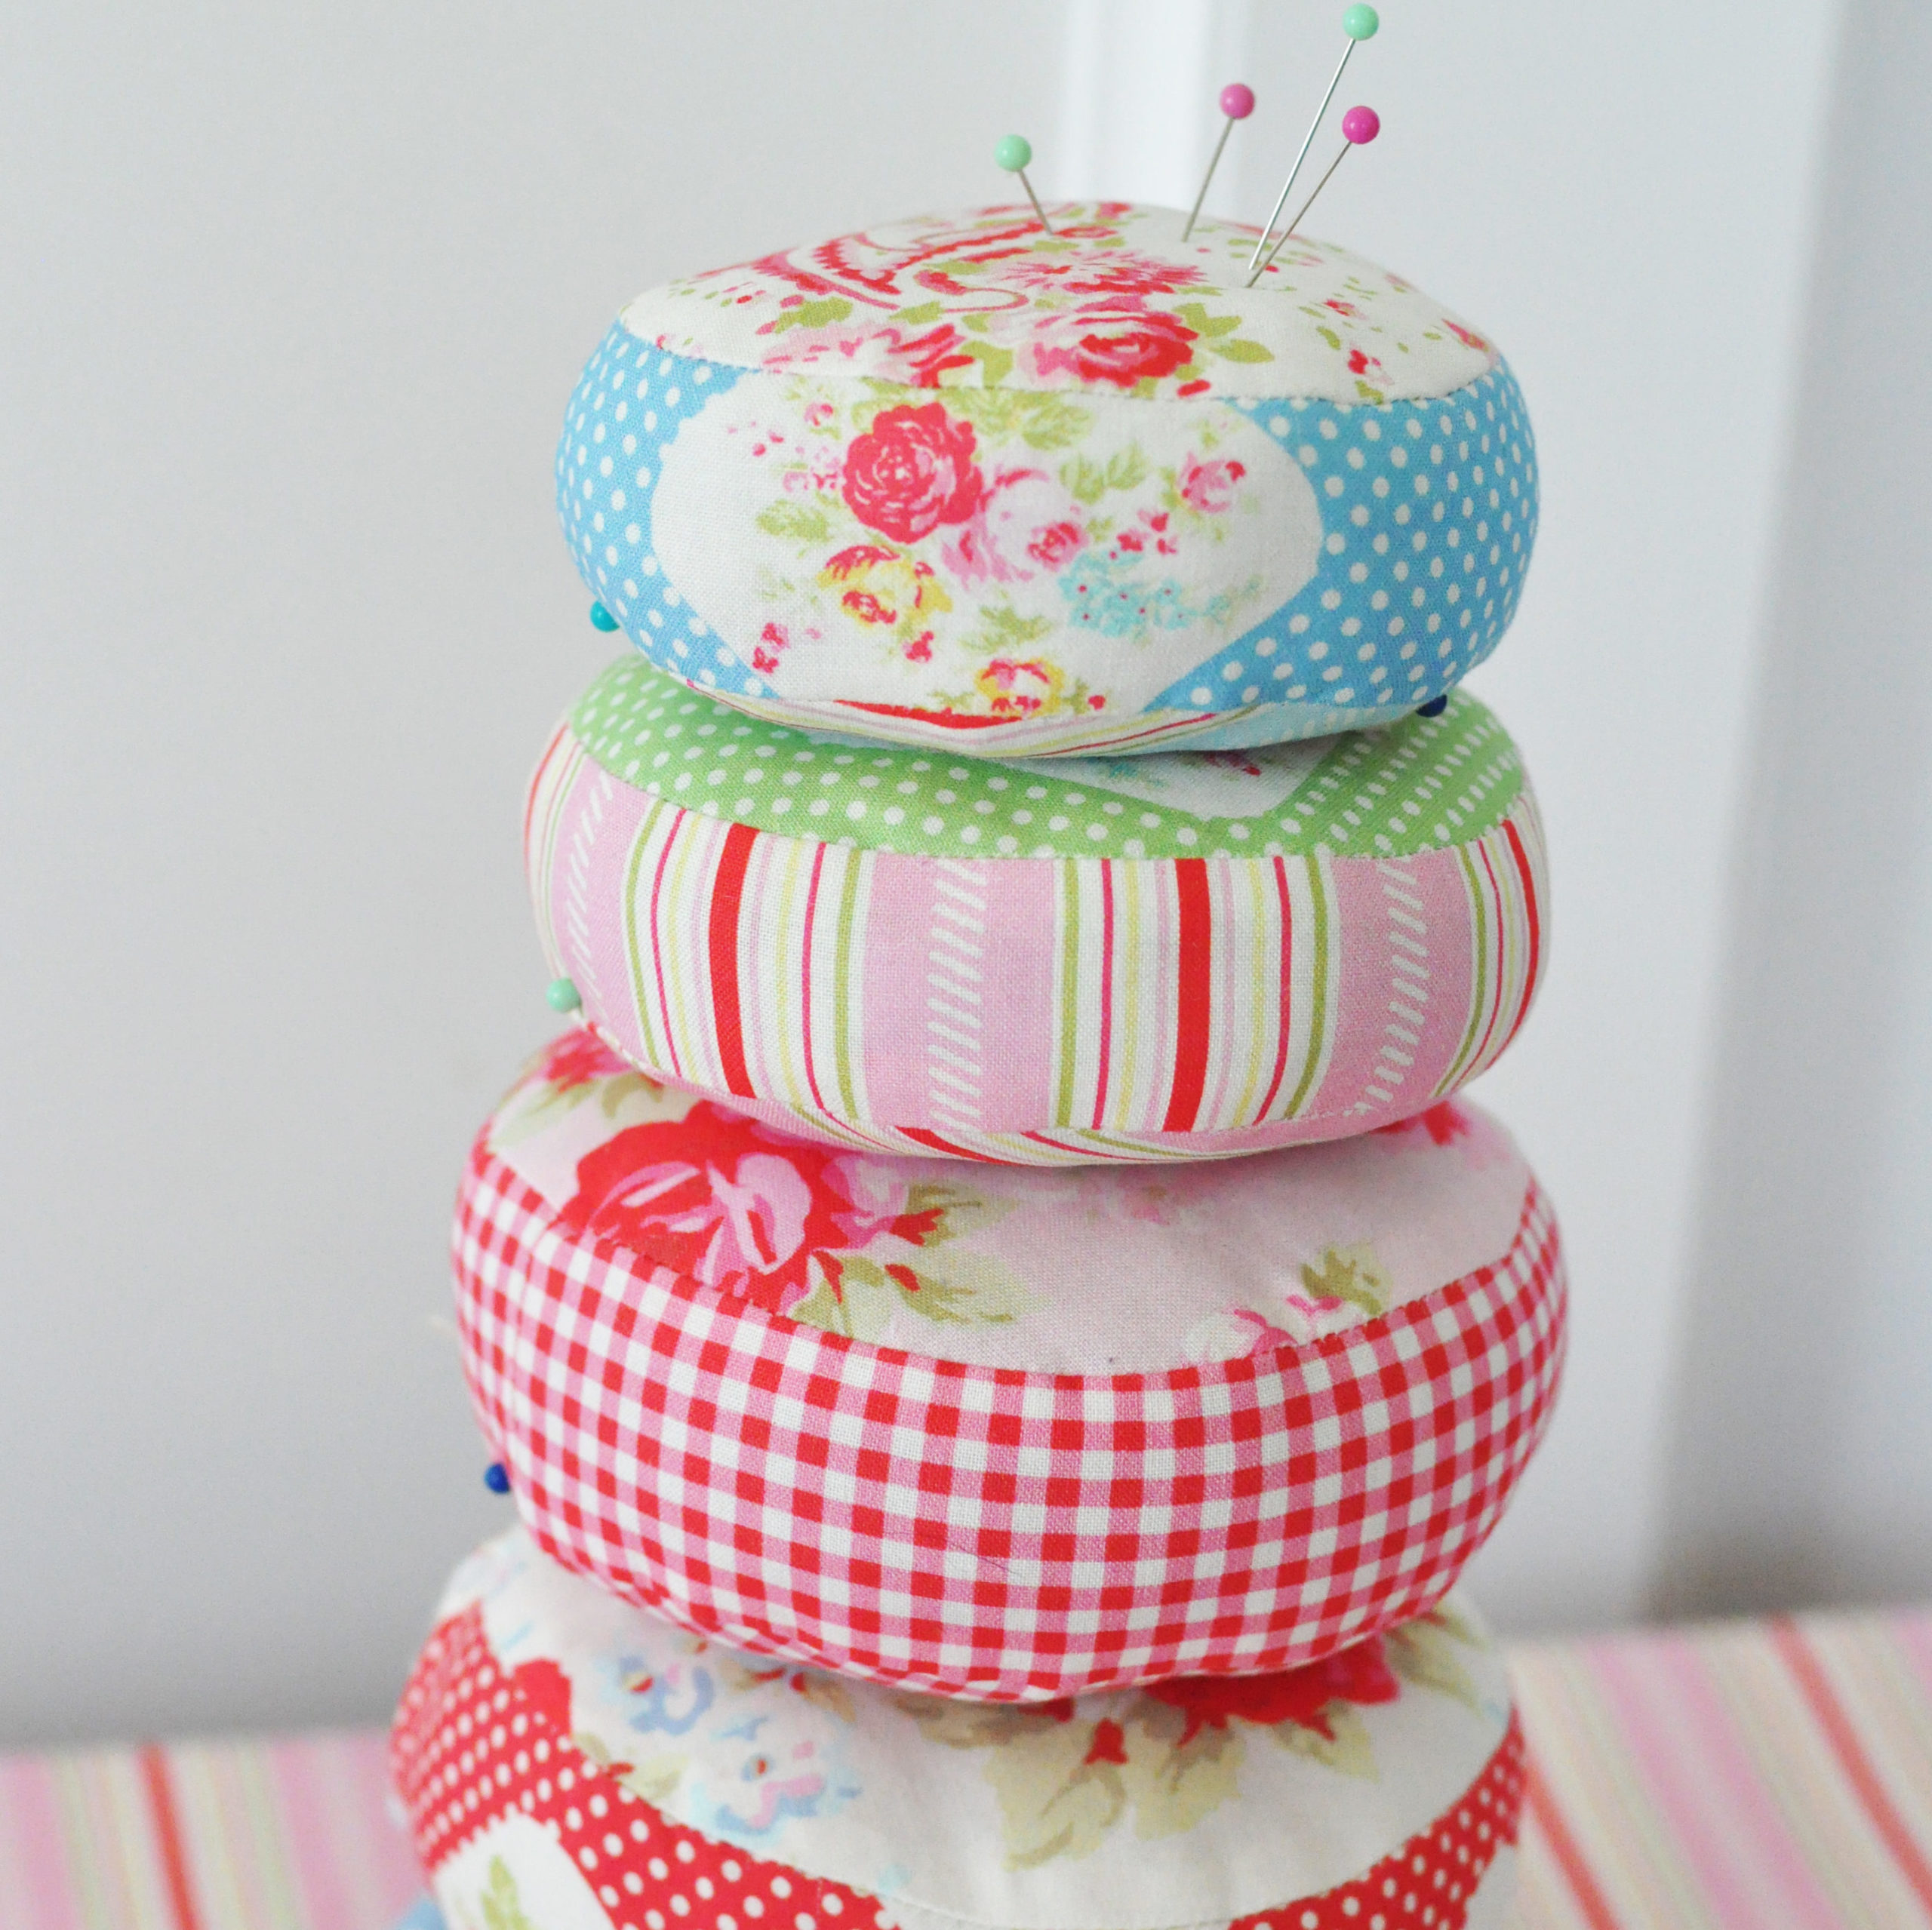 Pin Cushions made in Tanya Whelan's Posie collection